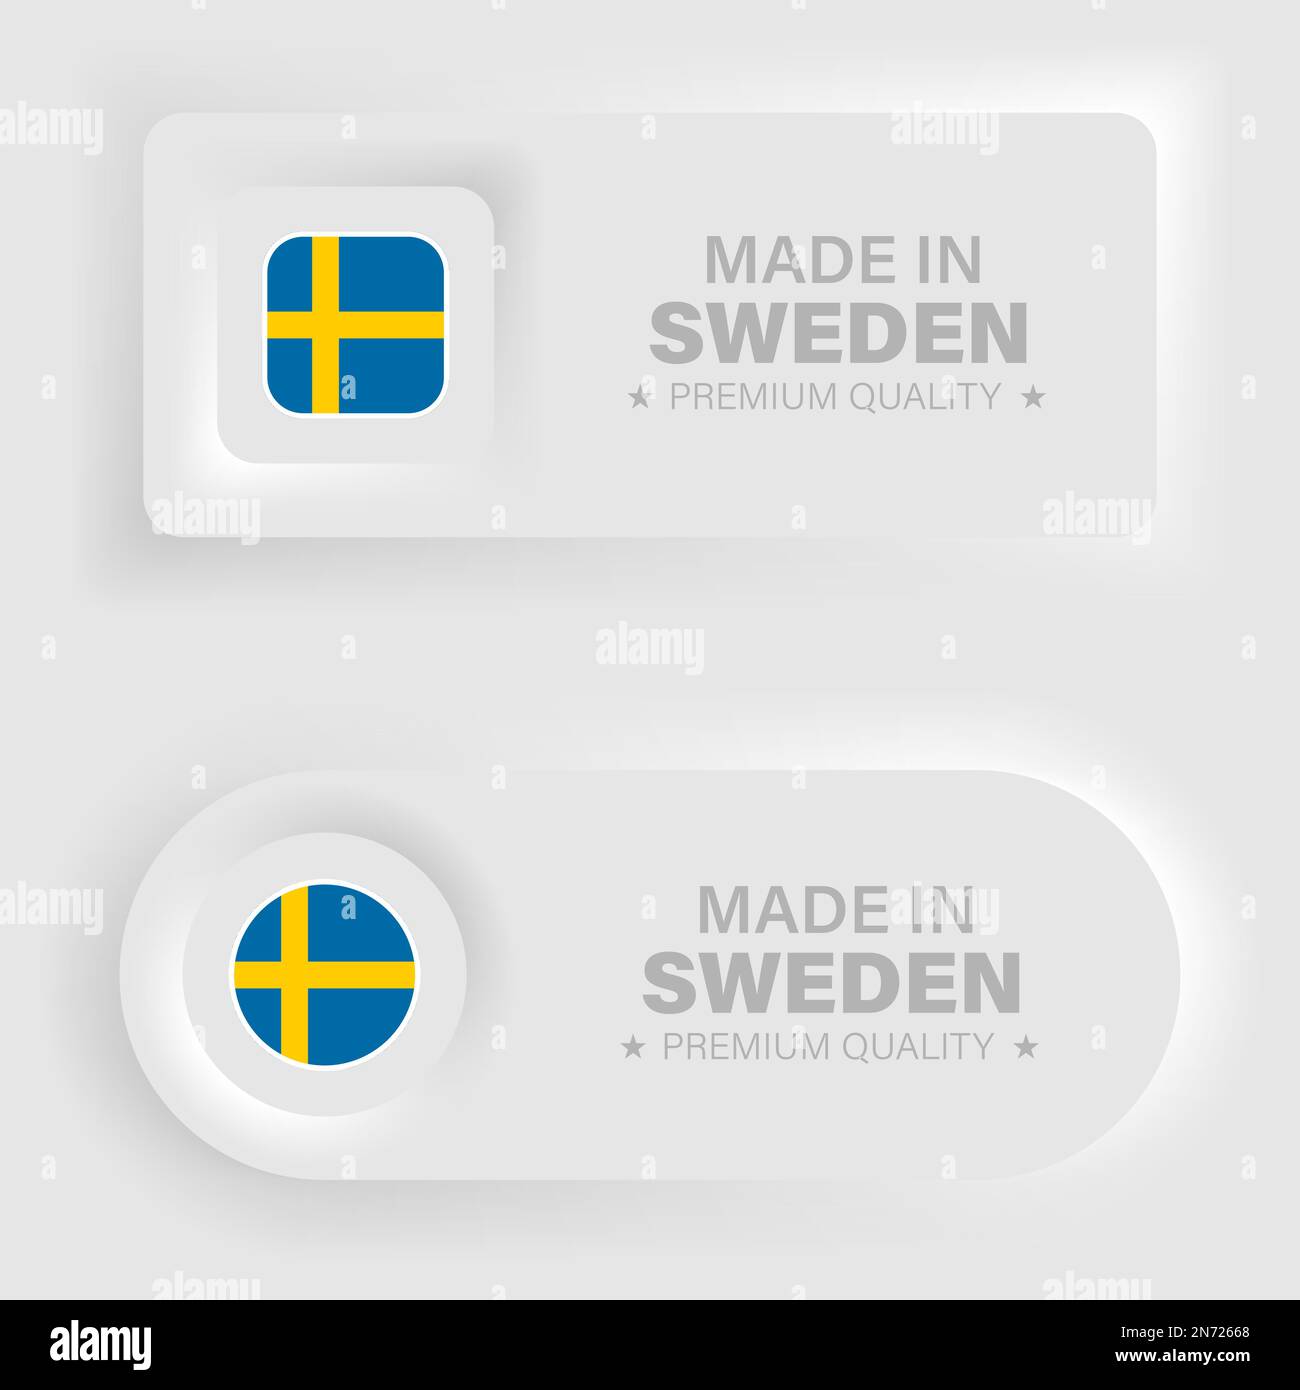 Made in Sweden neumorphic graphic and label. Element of impact for the use you want to make of it. Stock Vector